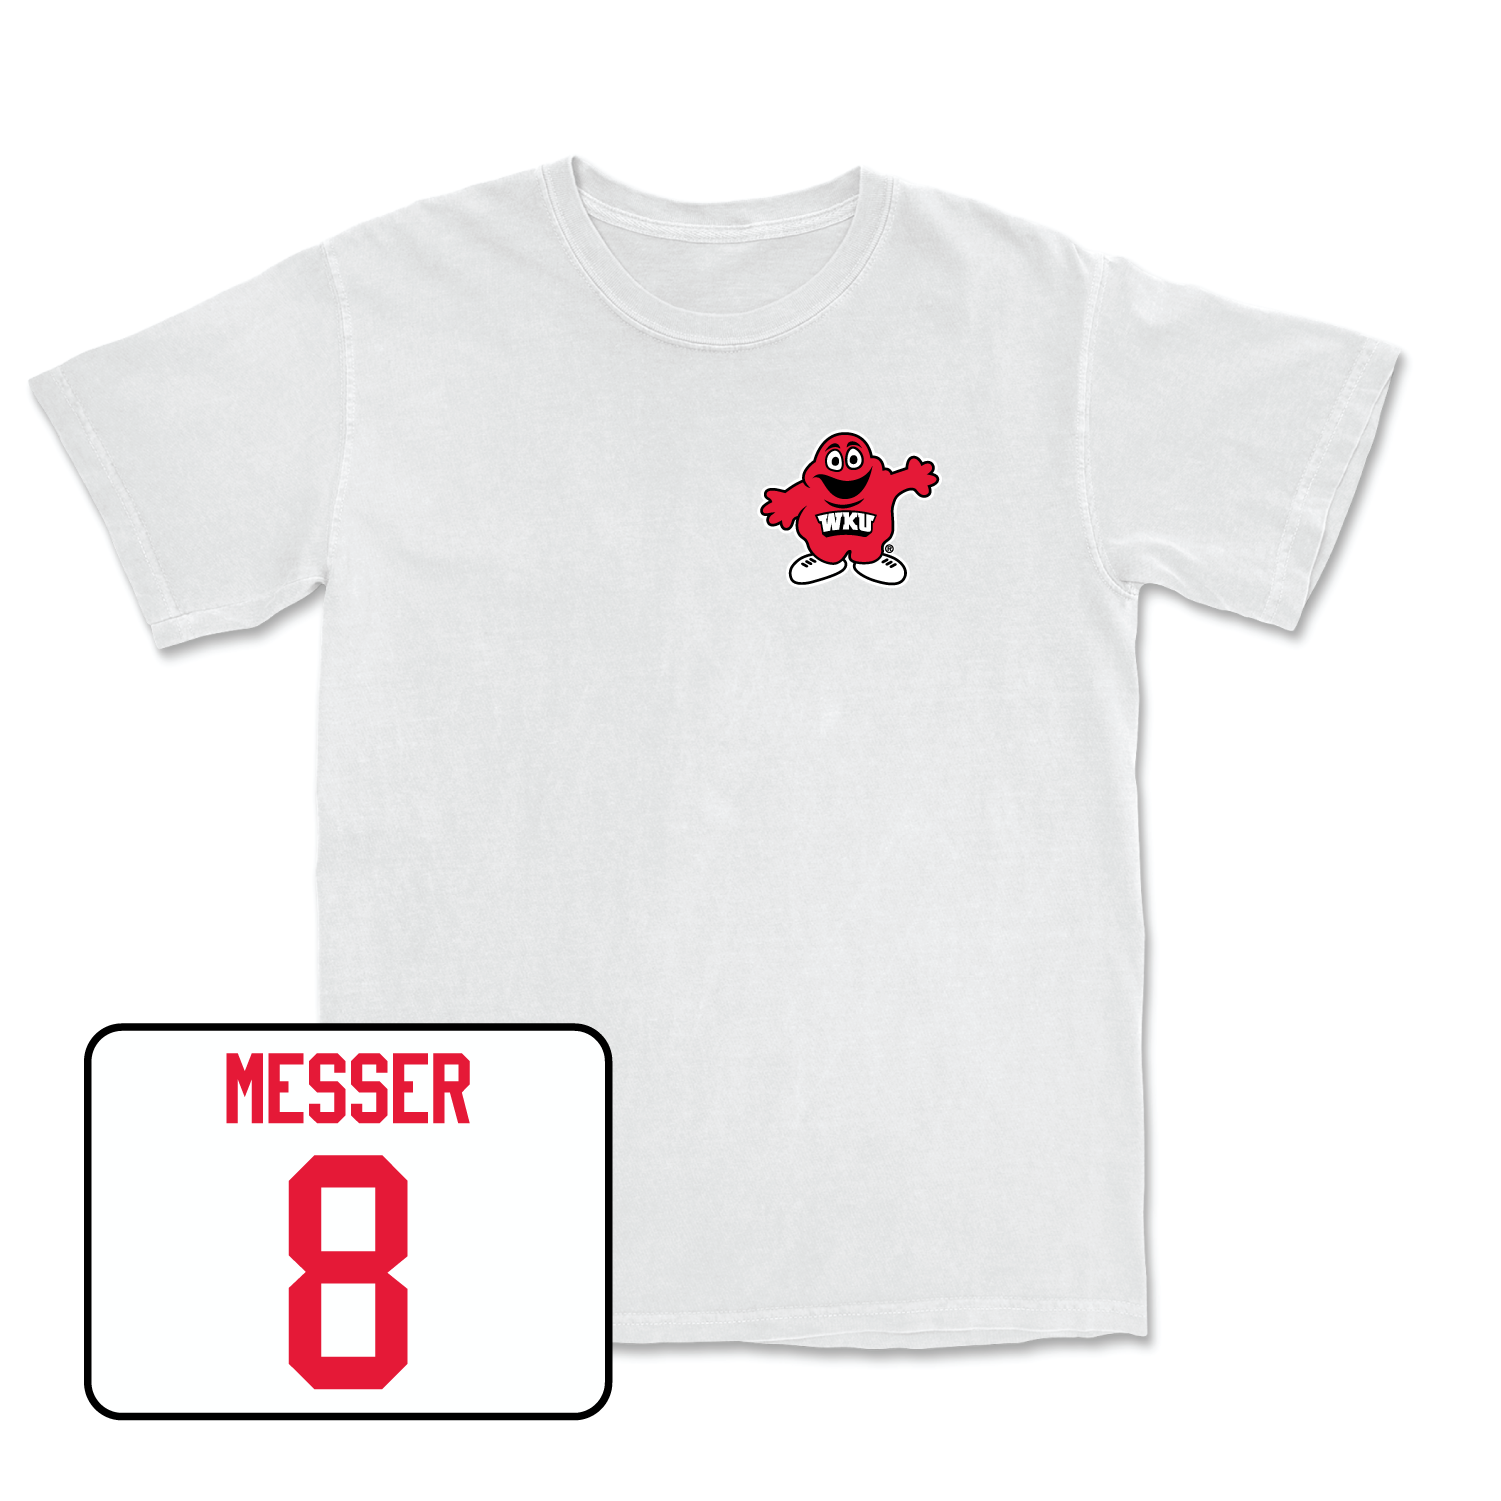 White Football Big Red Comfort Colors Tee 2 Youth Small / Easton Messer | #8